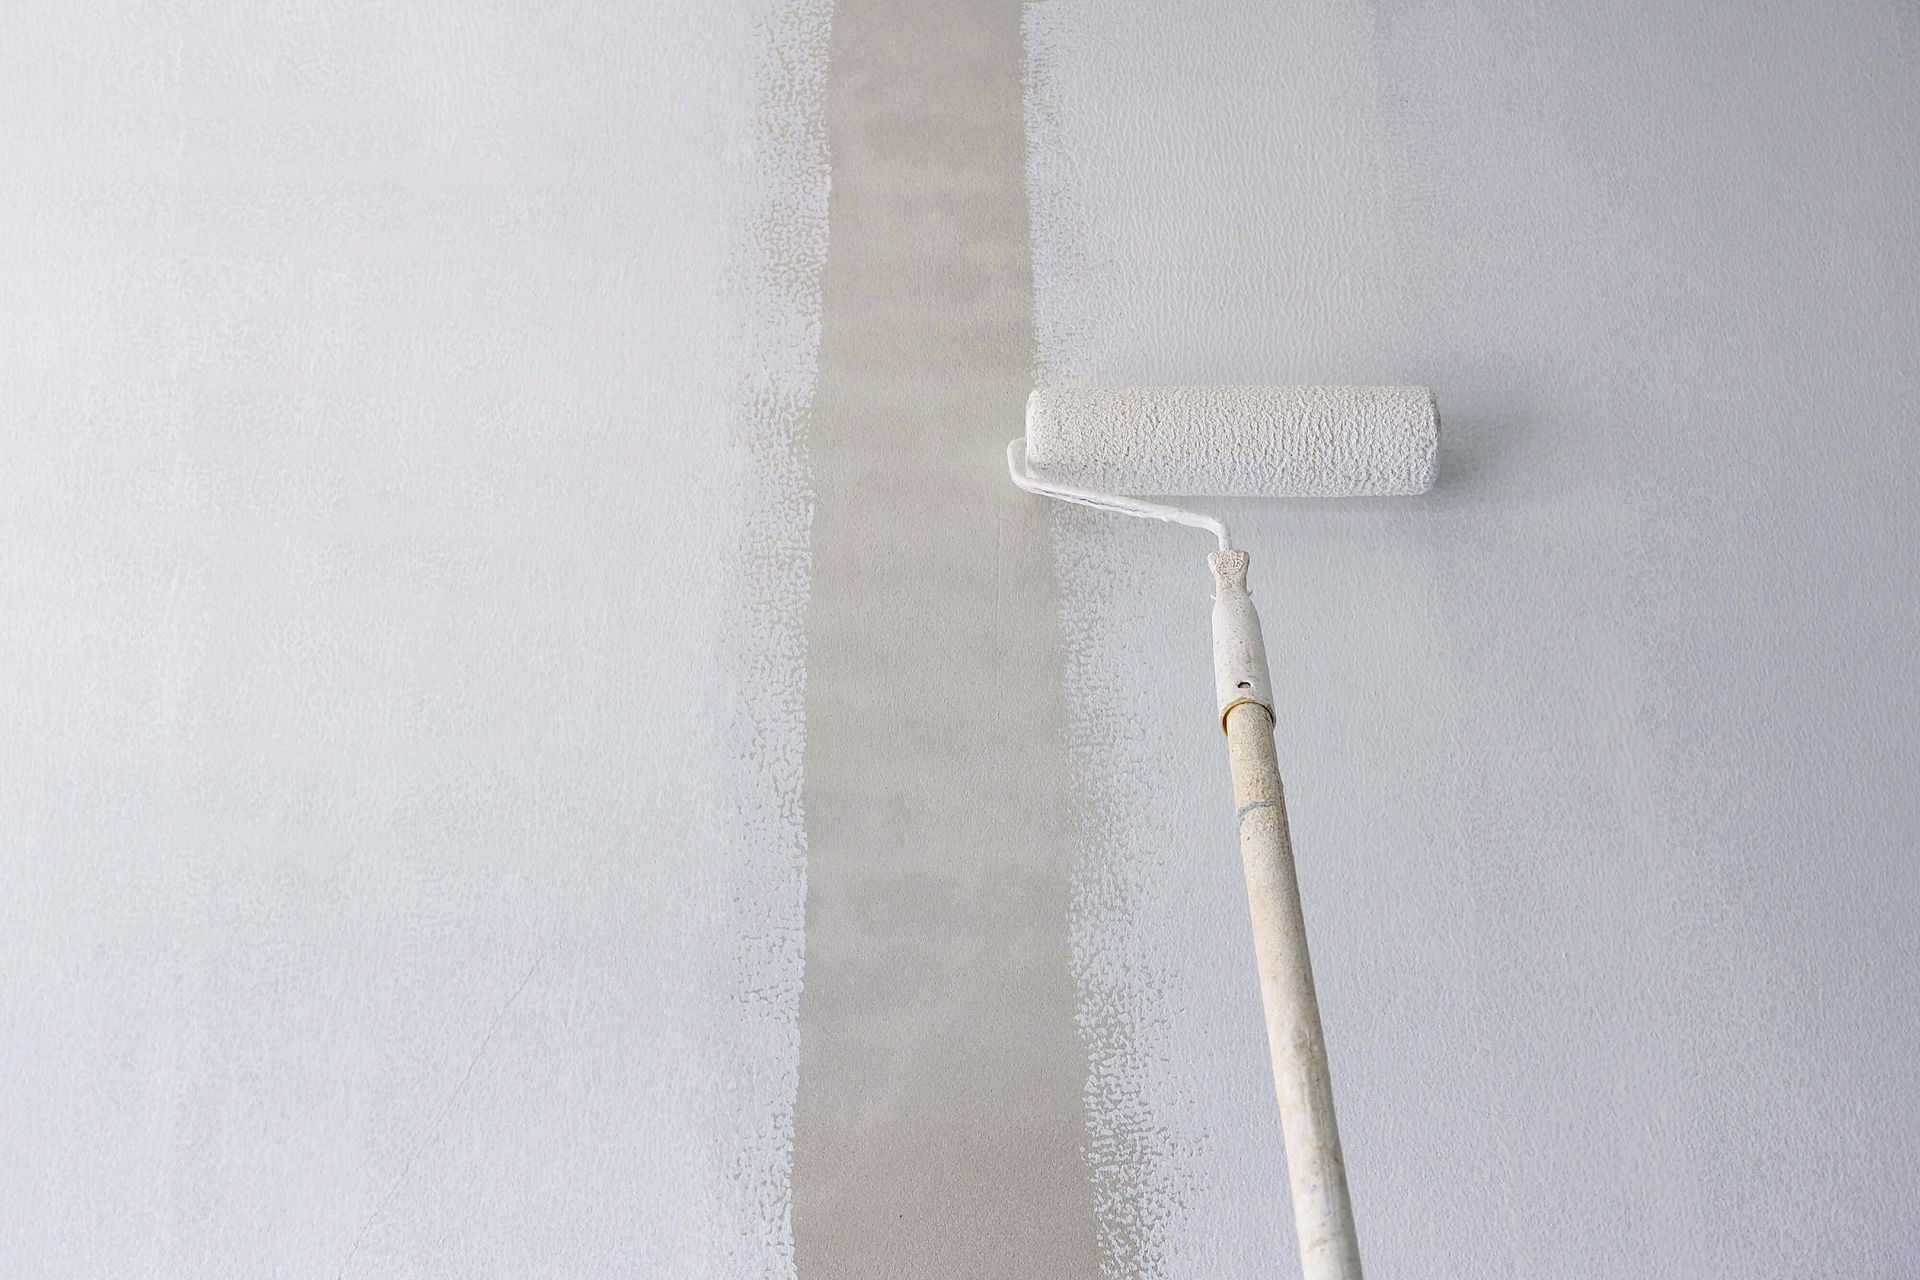 An individual using a long handle roller brush to apply a coat of primer white paint onto a cement wall background.